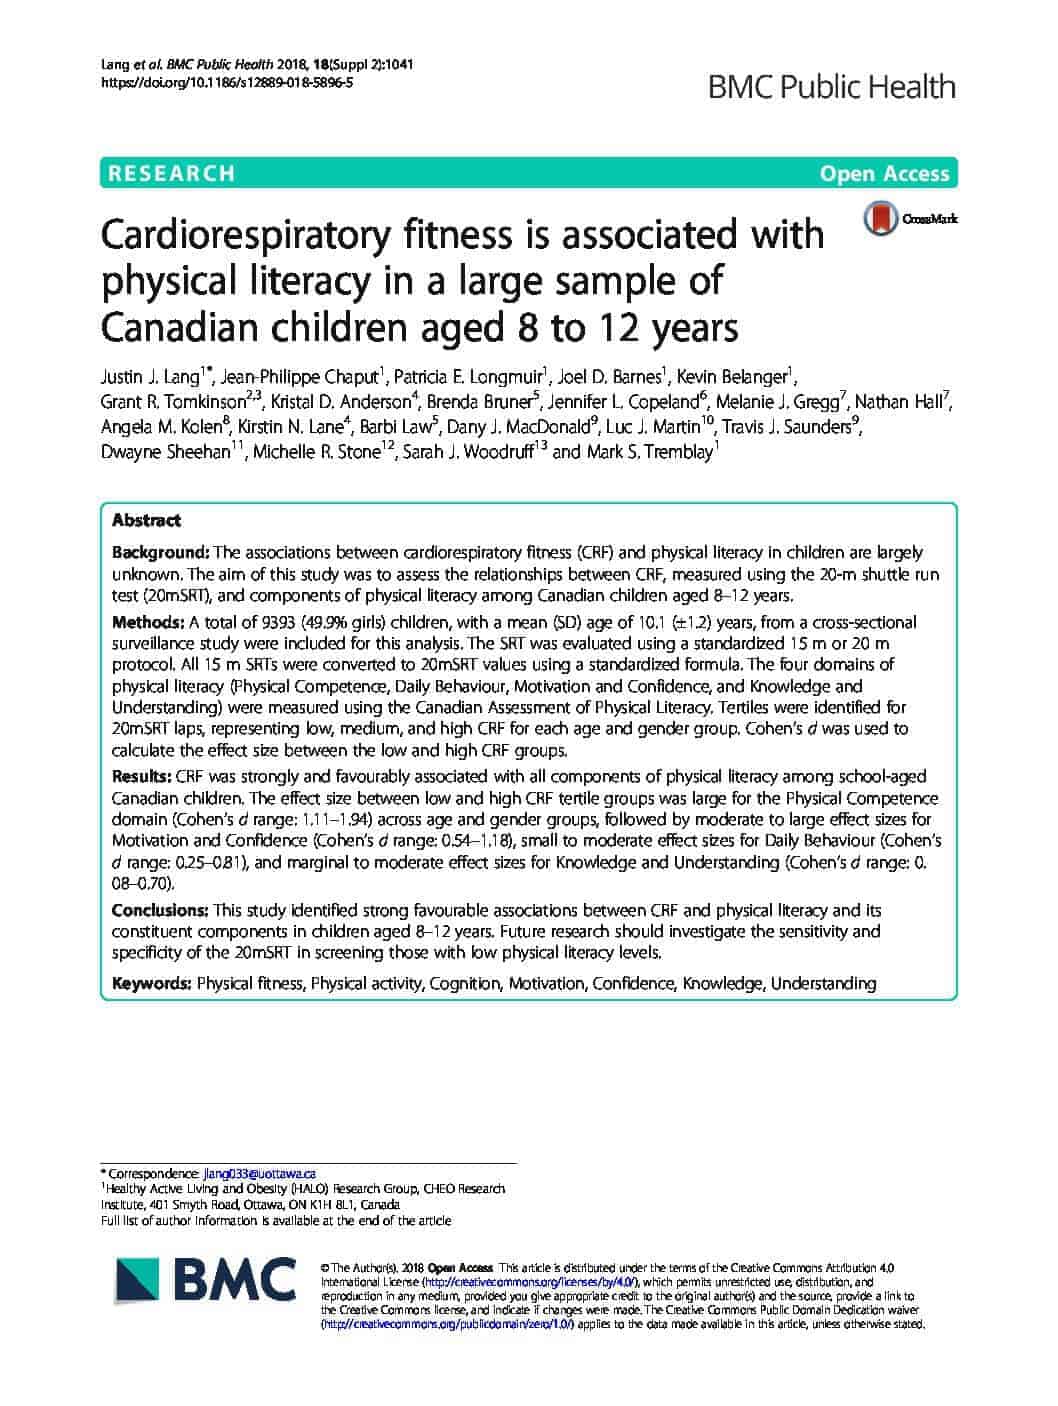 Cardiorespiratory fitness is associated with physical literacy in a large sample of Canadian children aged 8 to 12 years